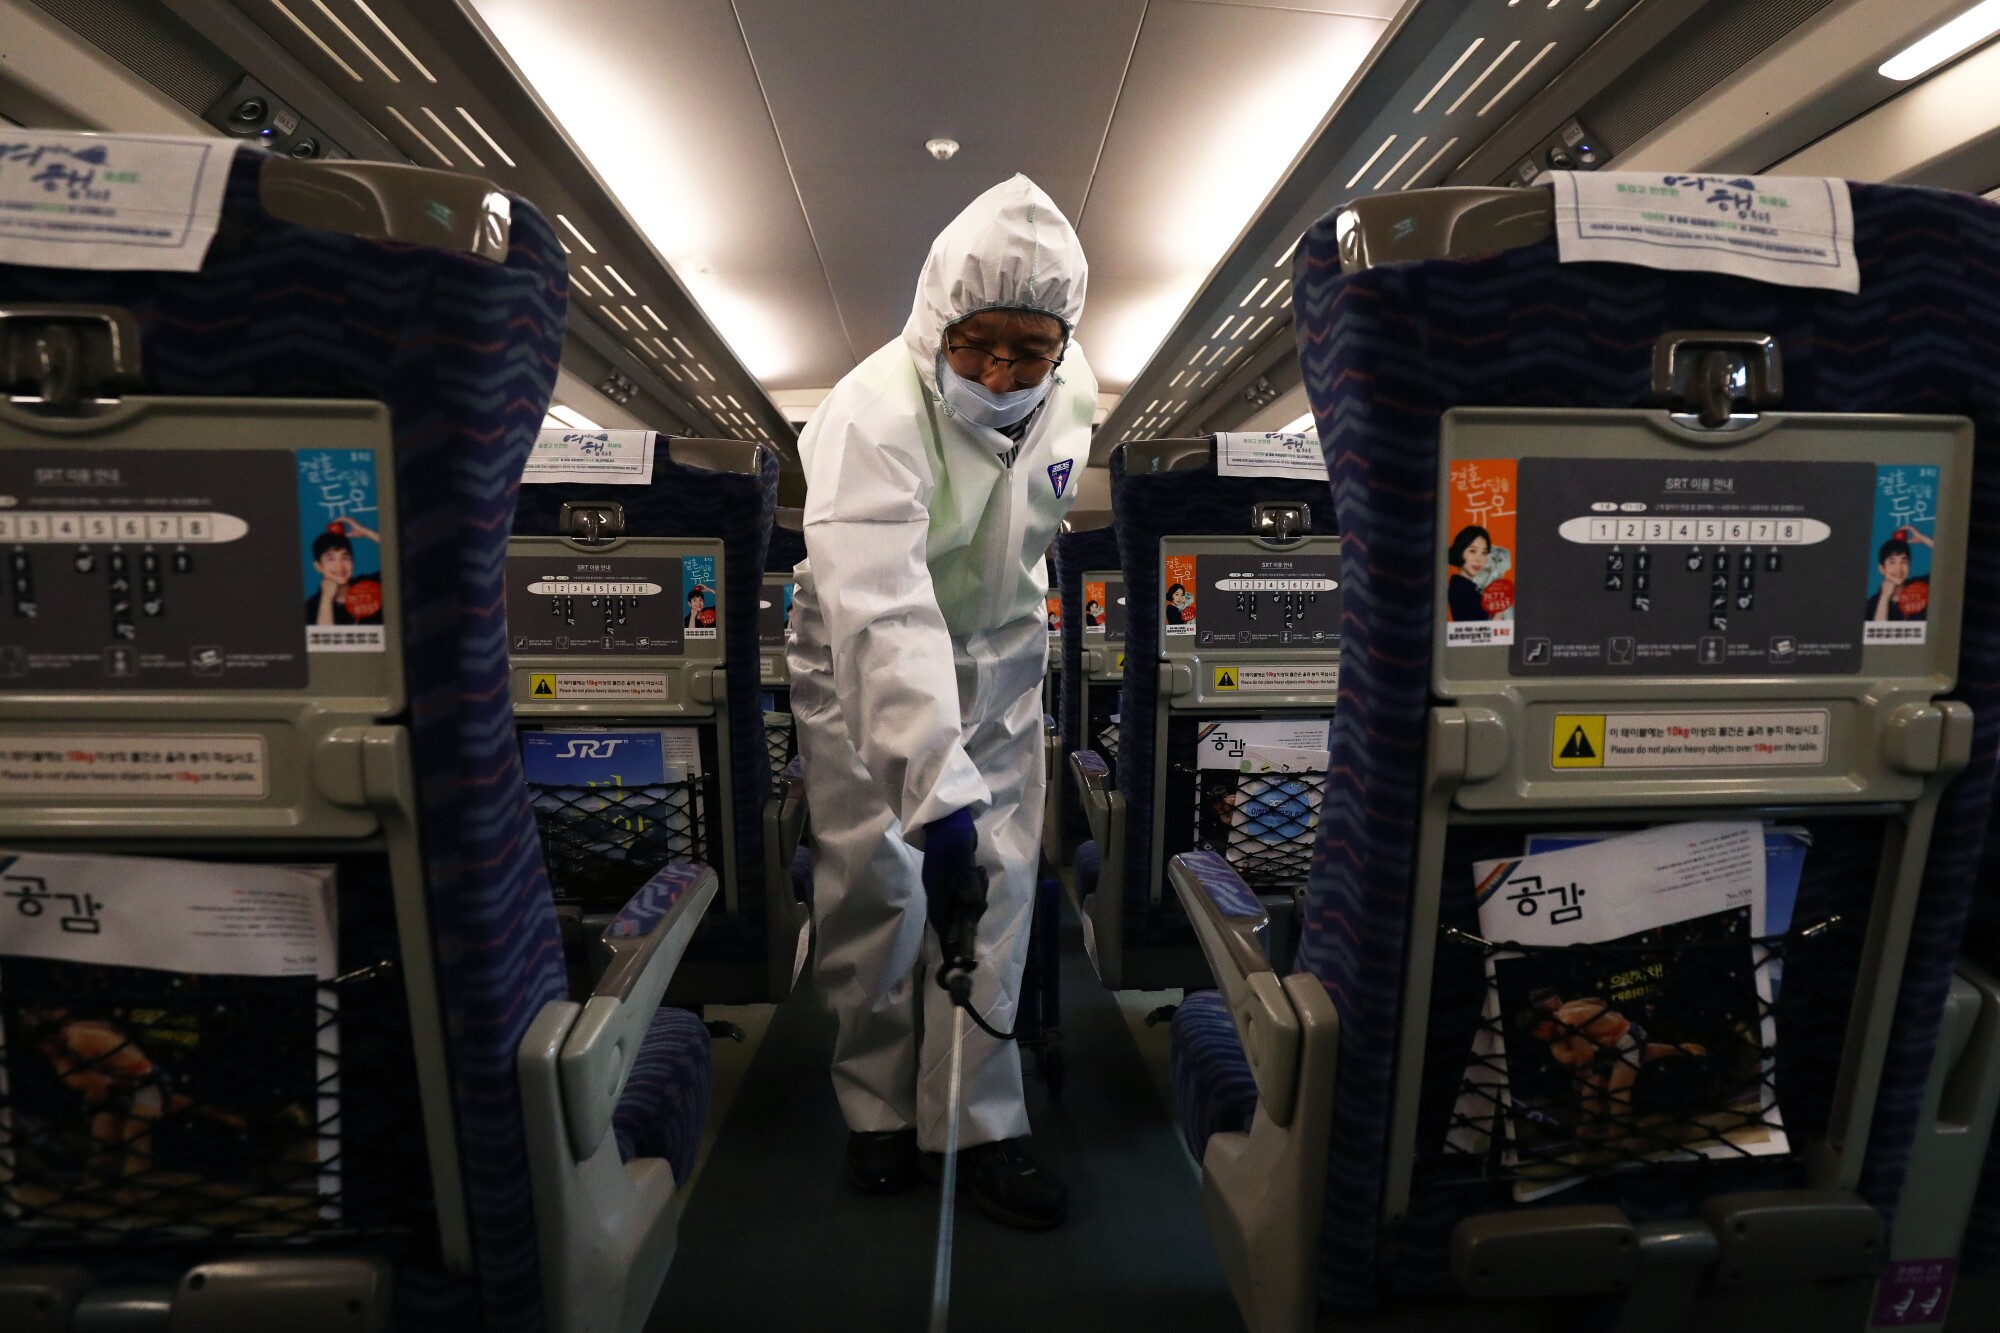 A disinfection worker wearing protective gear sprays antiseptic solution in a train at an SRT train station on Friday in Seoul amid rising public concerns over the spread of China's coronavirus.